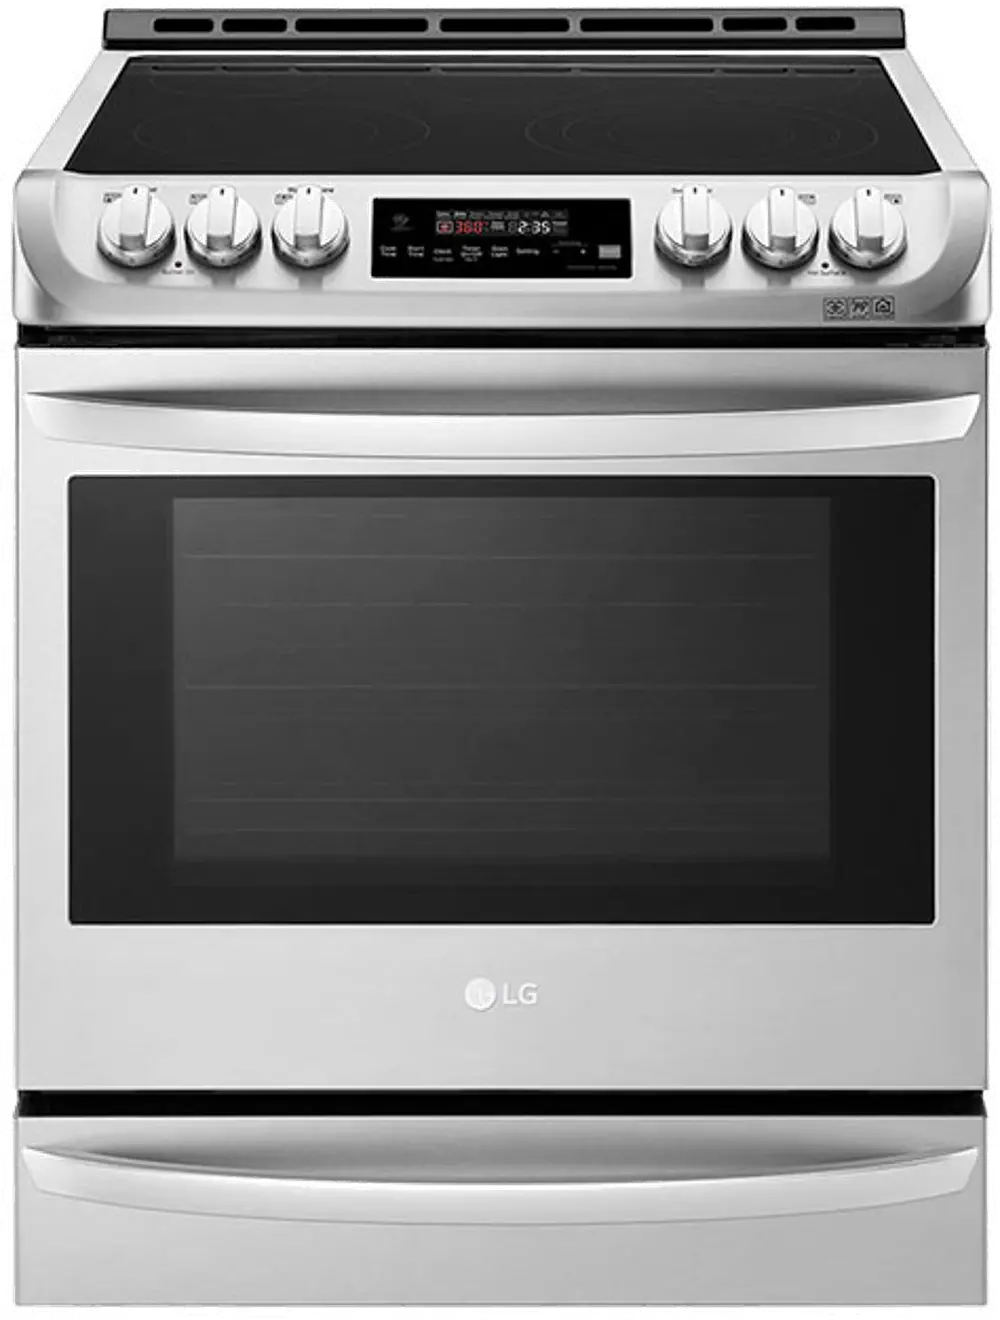 LSE4615ST LG 6.3 cu ft Electric Range - Stainless Steel-1